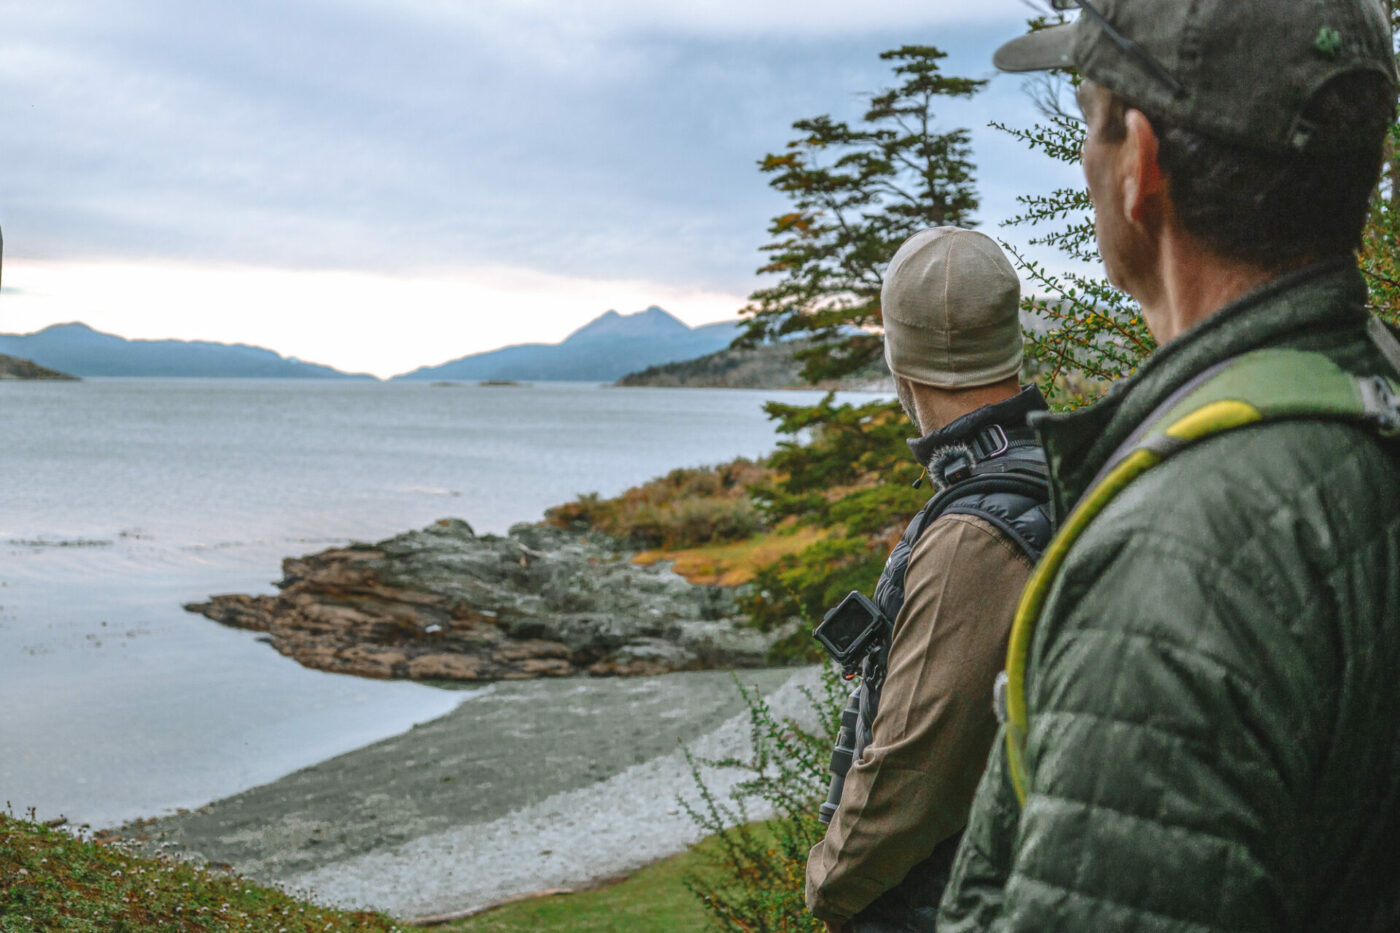 Admiring the view of Tierra del Fuego National Park